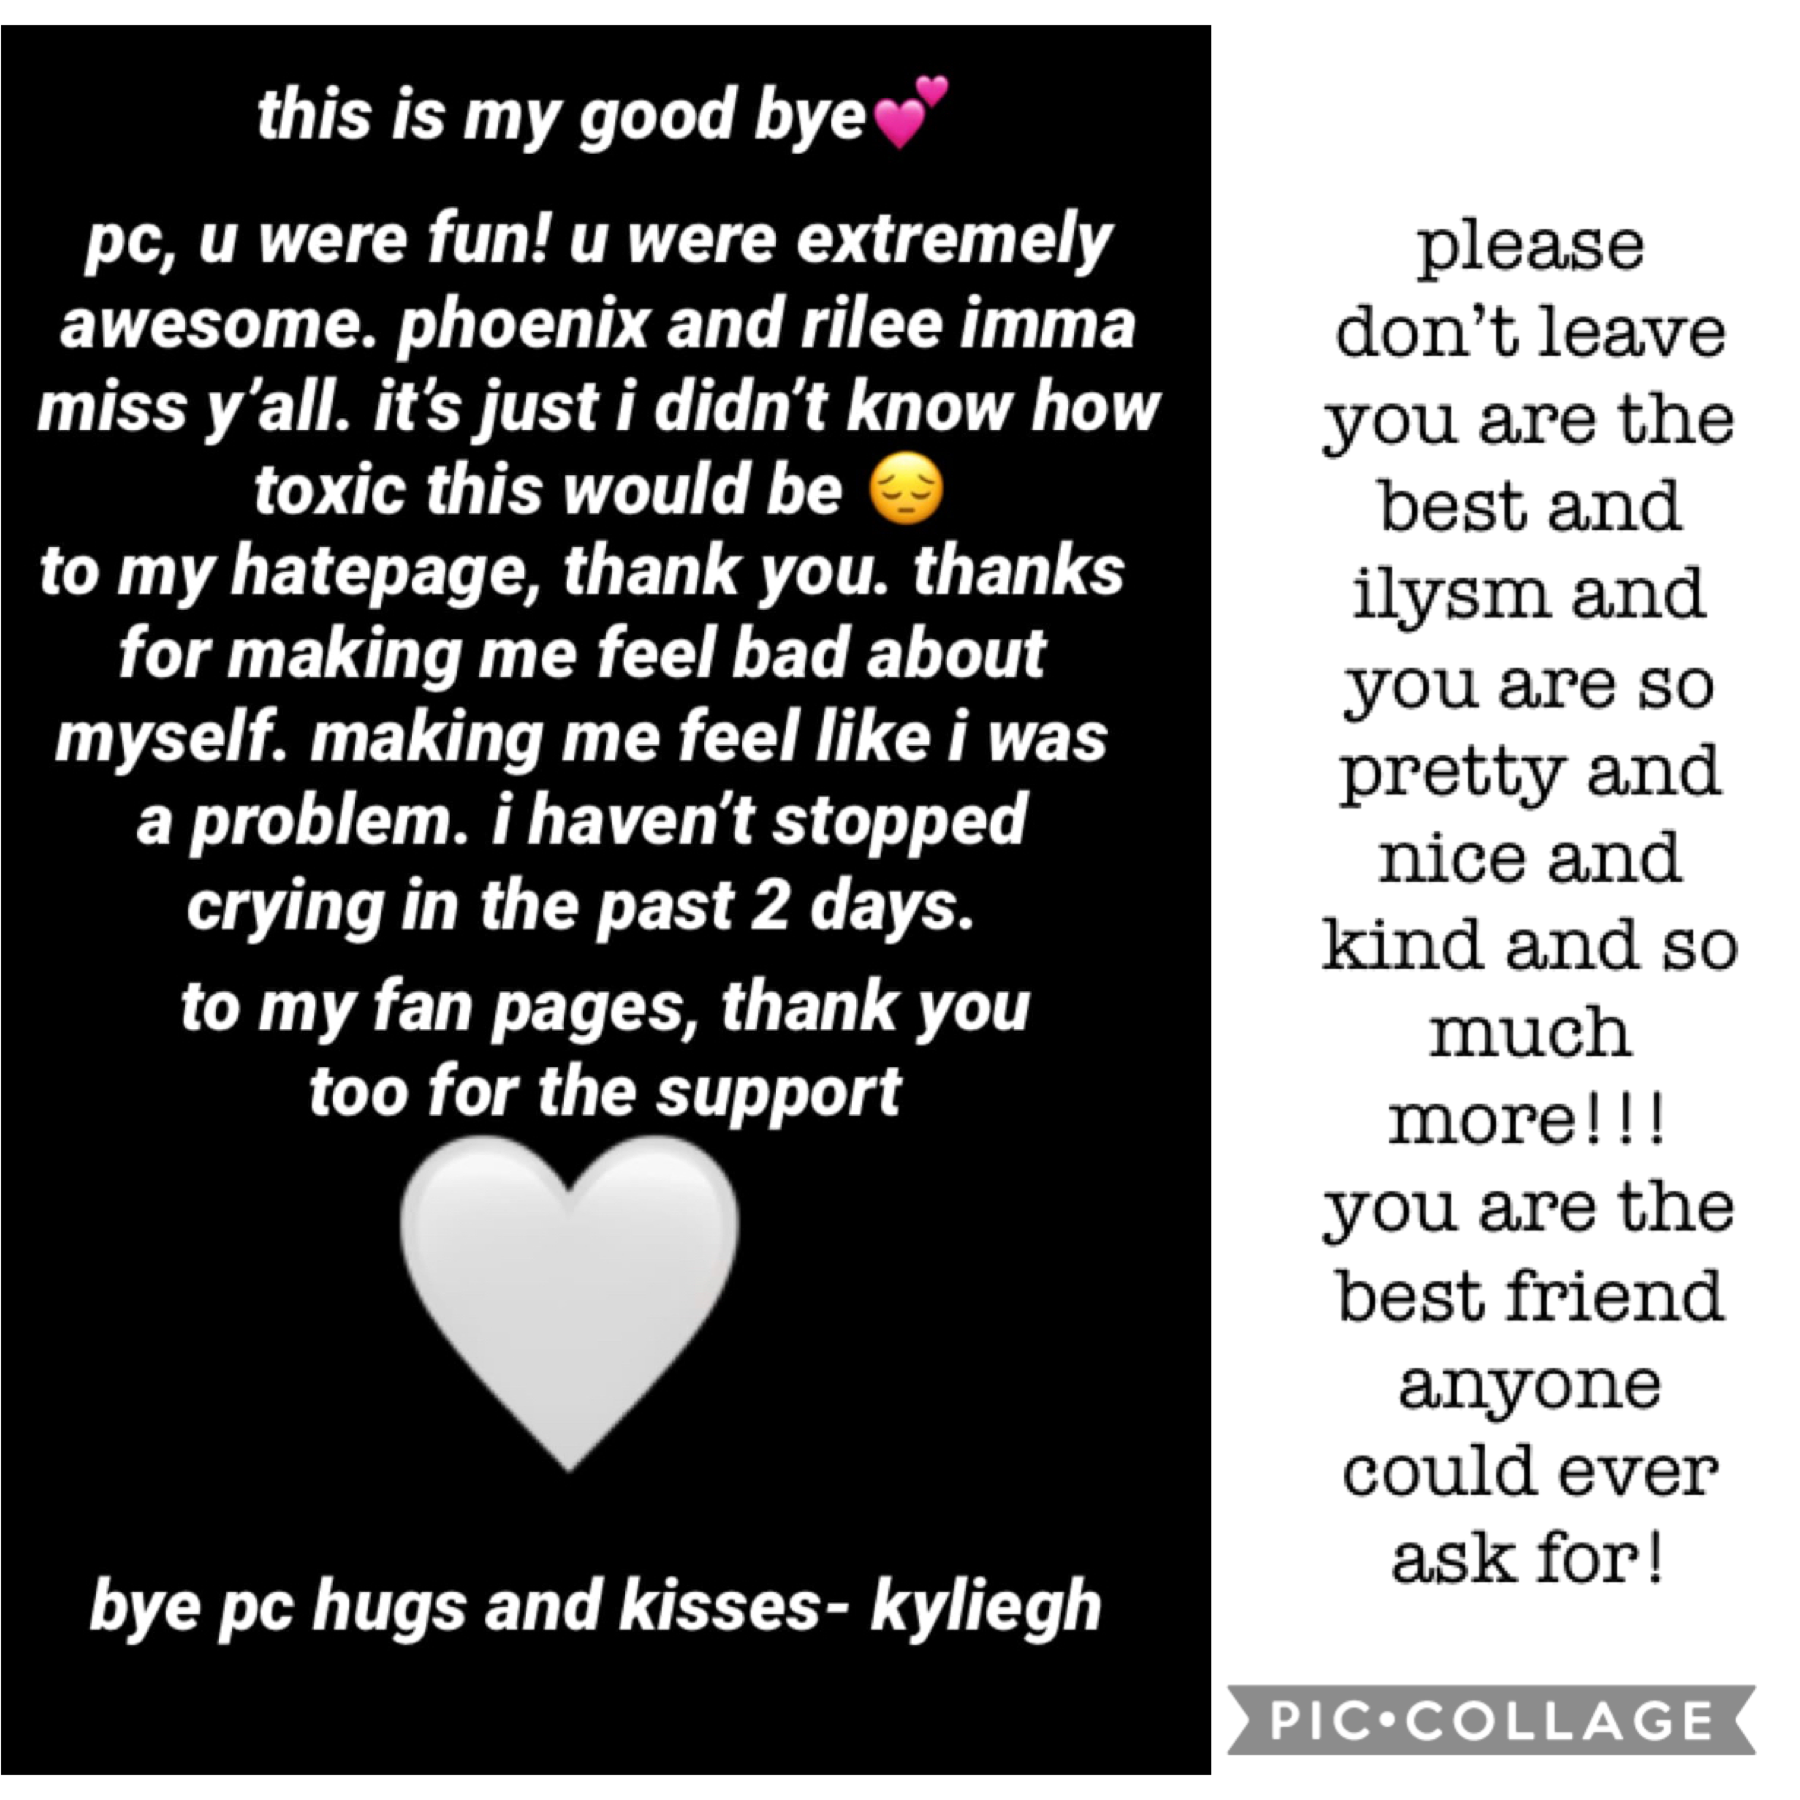 kyliegh please don’t leave!!!!